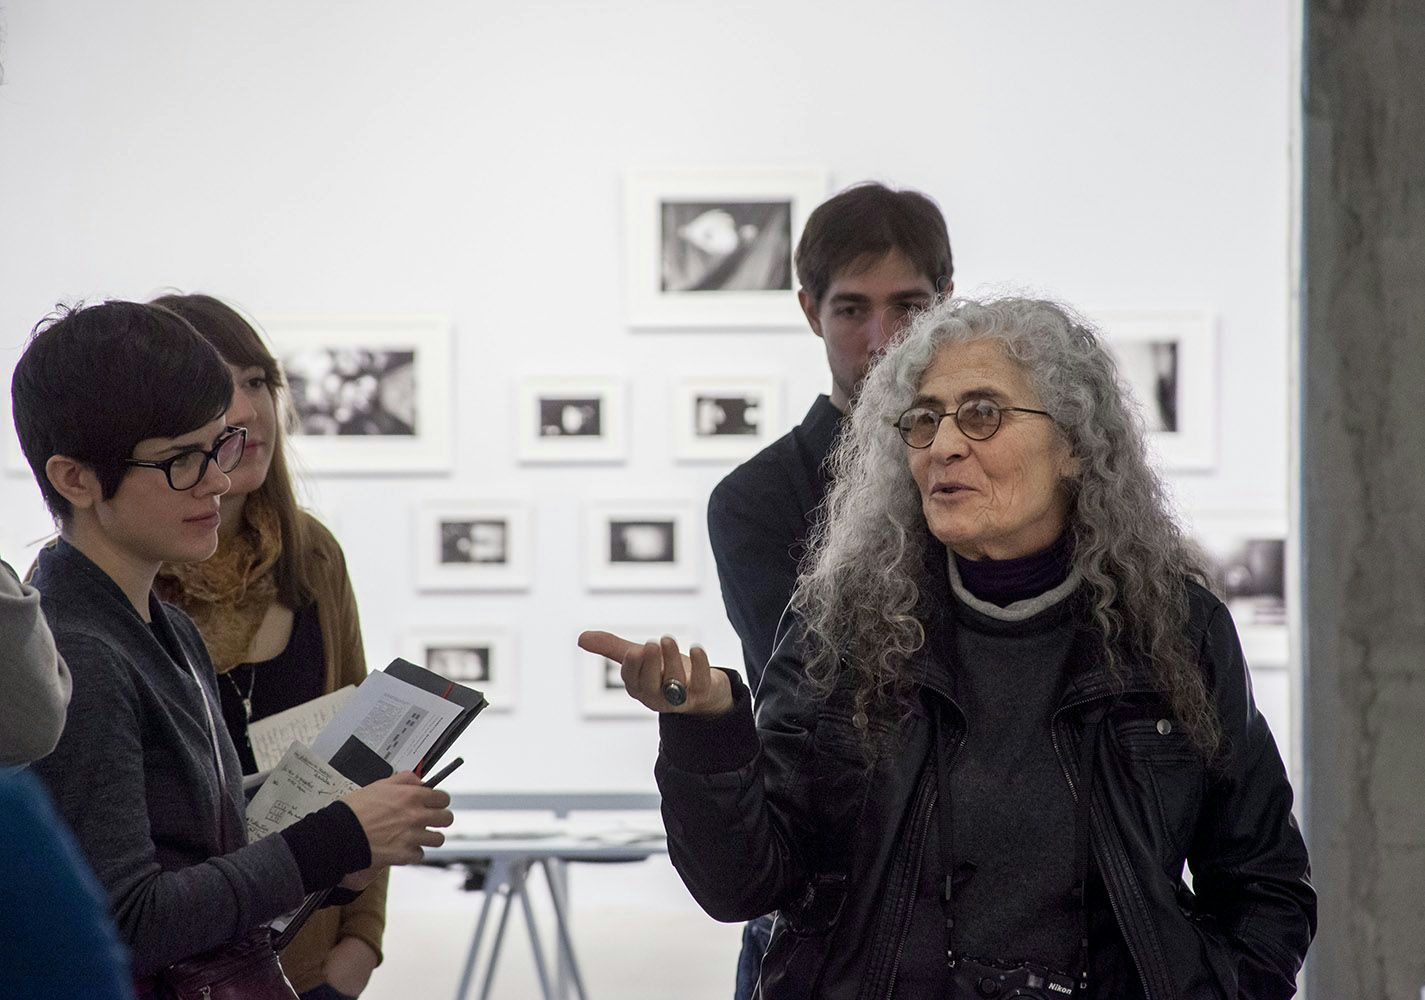 Guided tour within the exhibition Babette Mangolte, VOX, 2013.